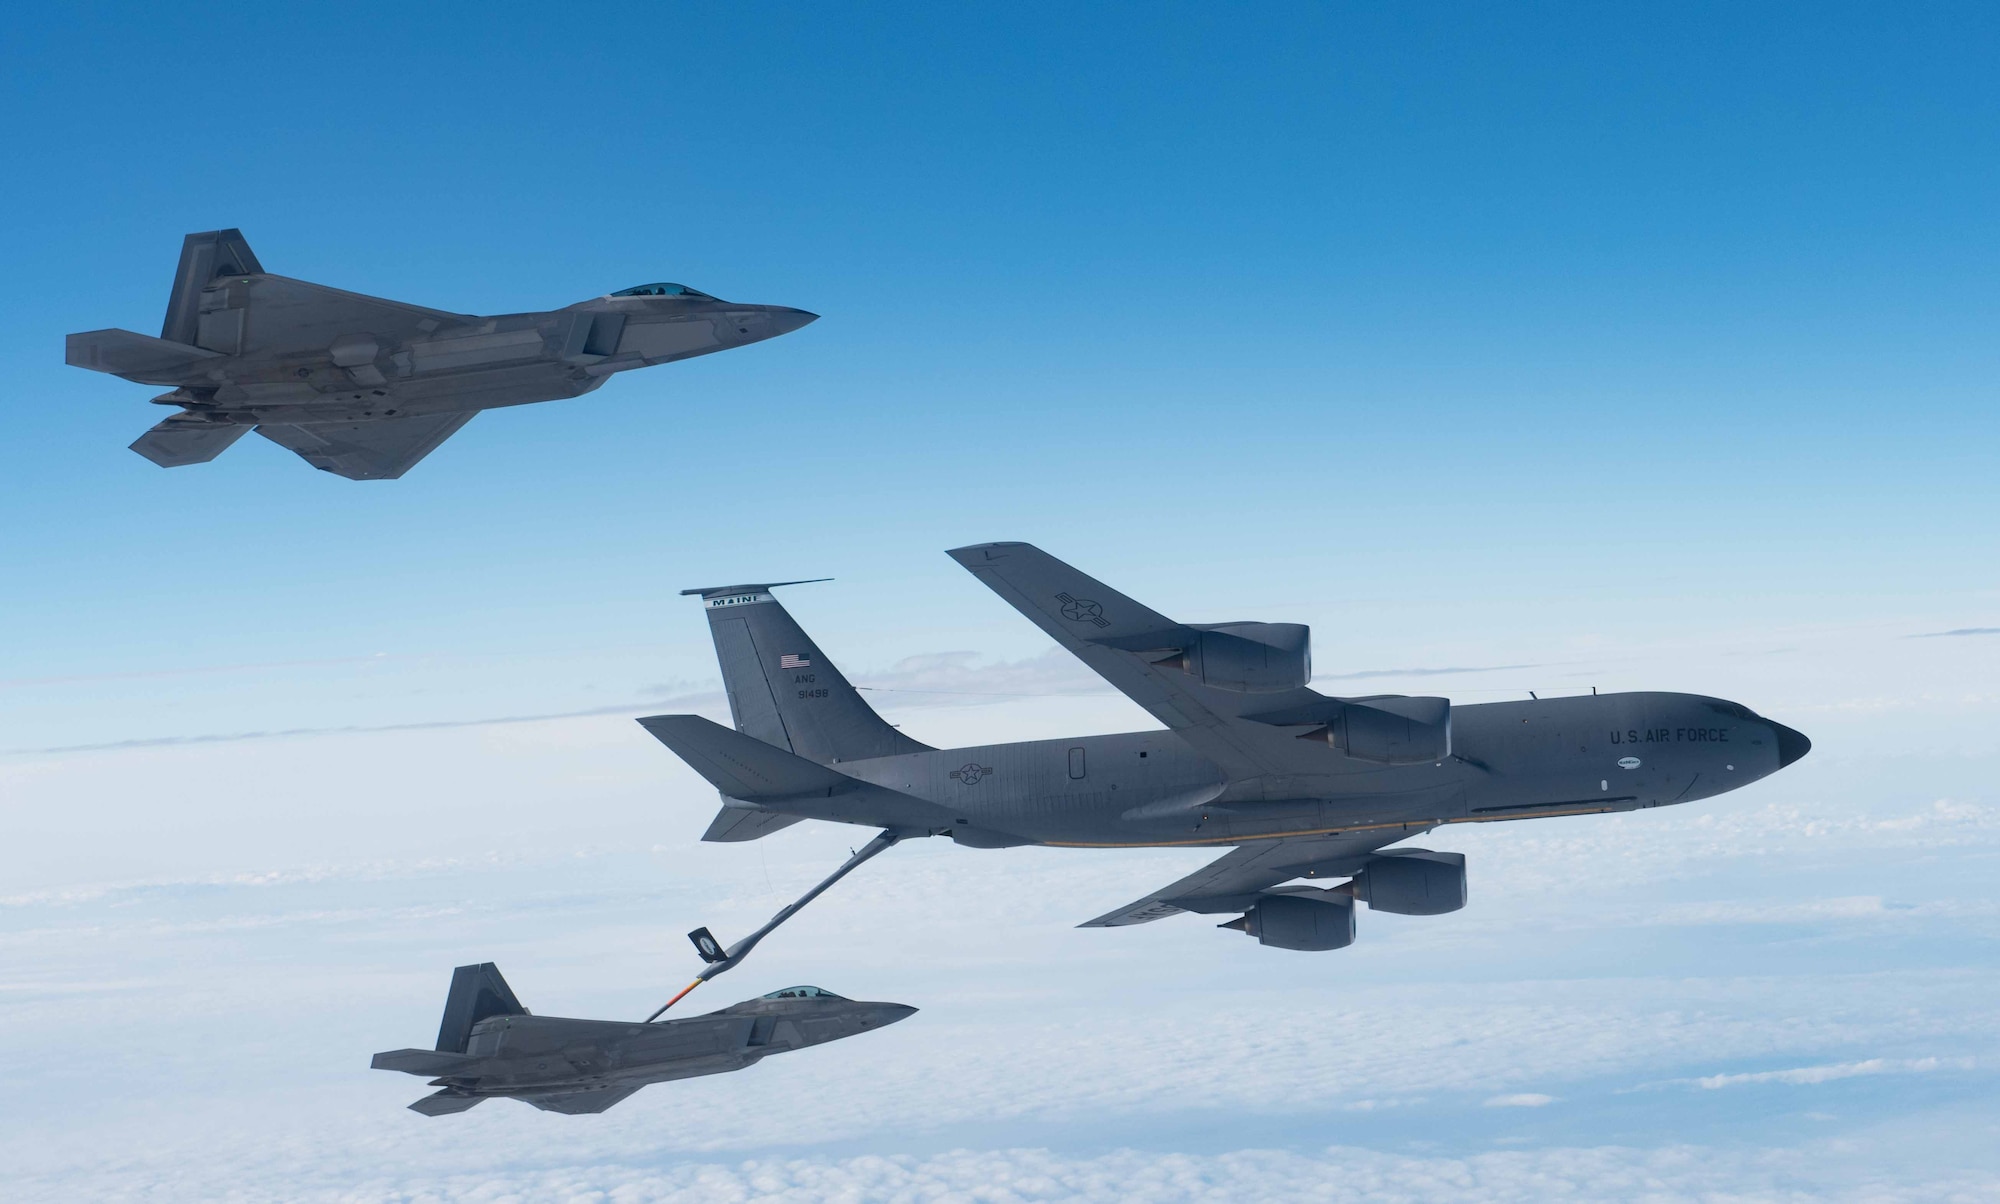 A KC-135 Stratotanker from the 101st Air Refueling Wing refuels F-22 Raptors from the 94th Fighter Squadron over the Atlantic Ocean, February 22, 2018.